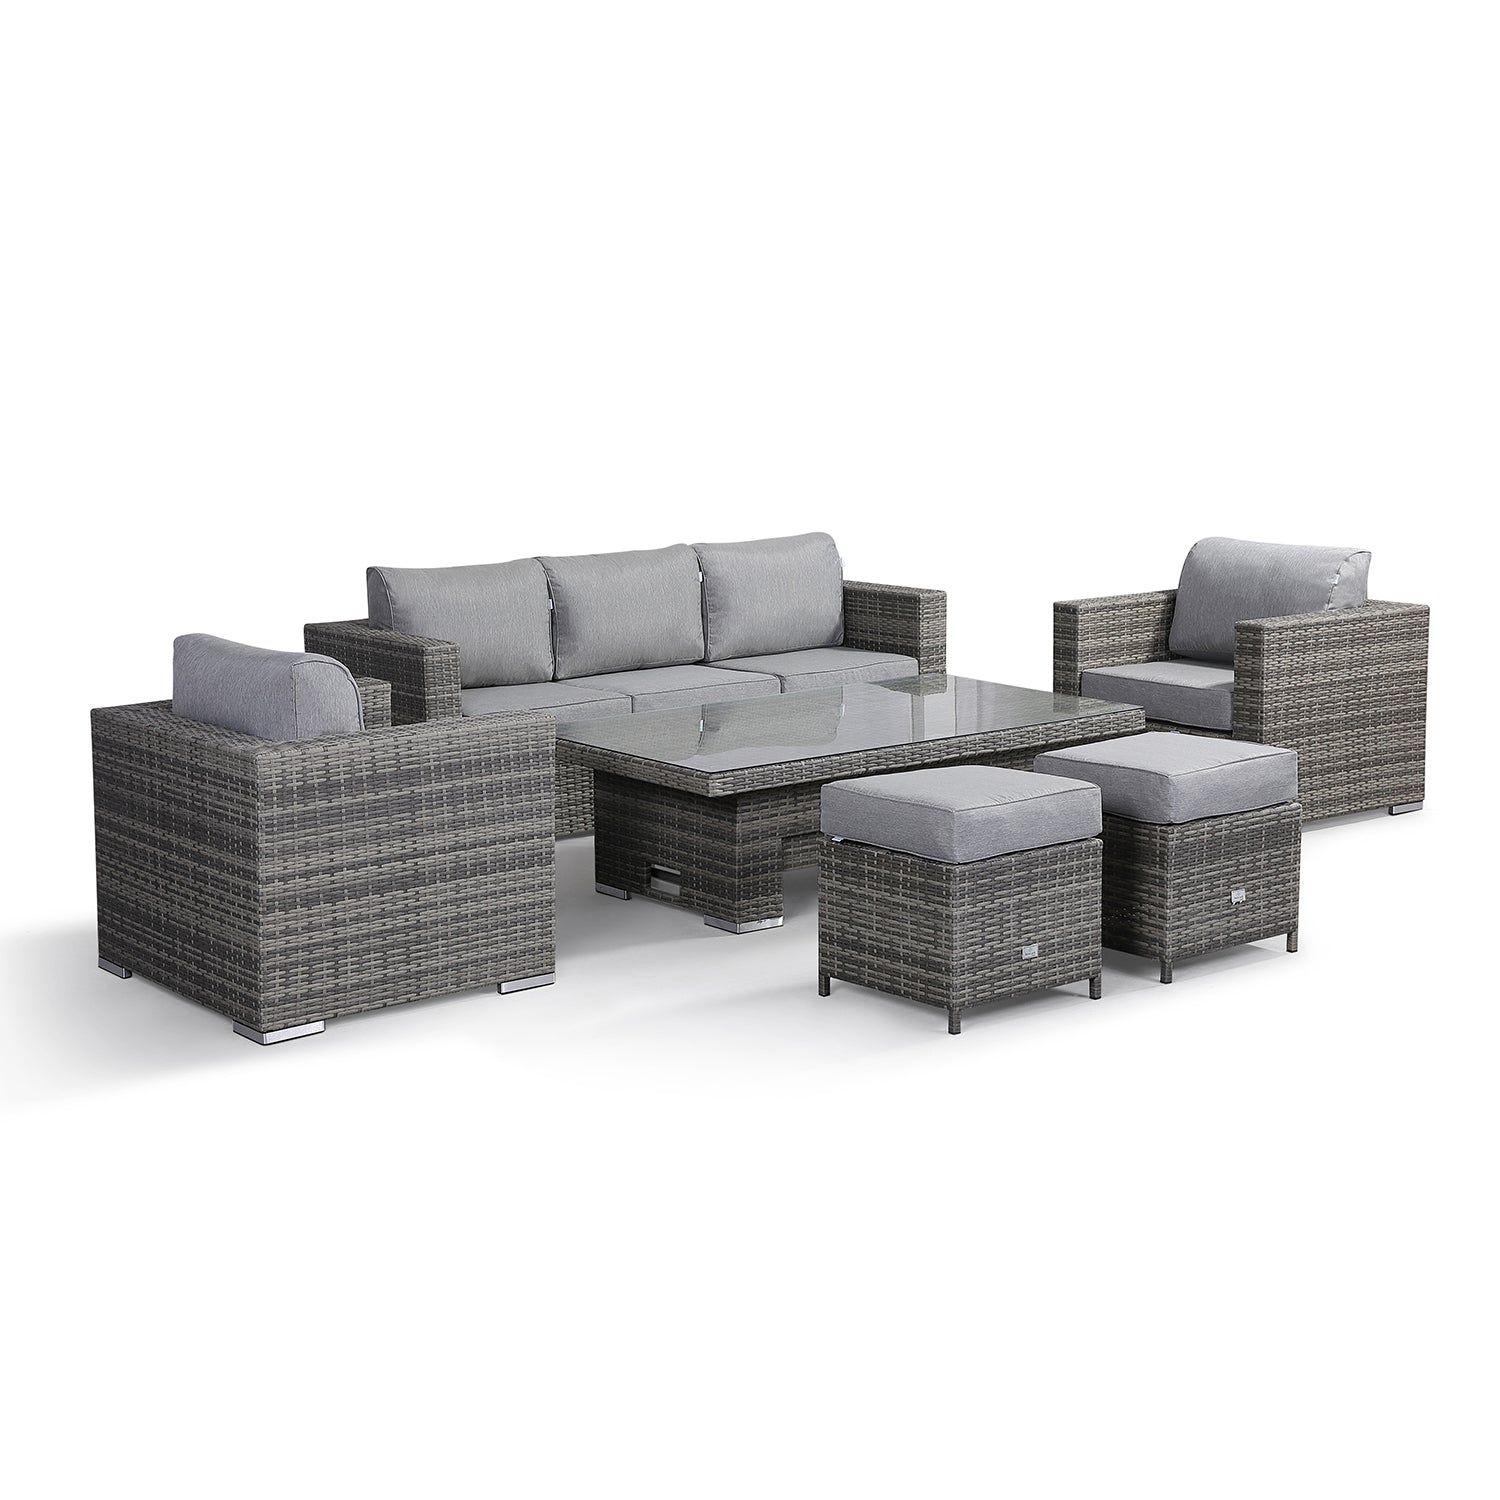 Cambridge Large Sofa Set with Rising Table in Stone Grey Weave(cr09)